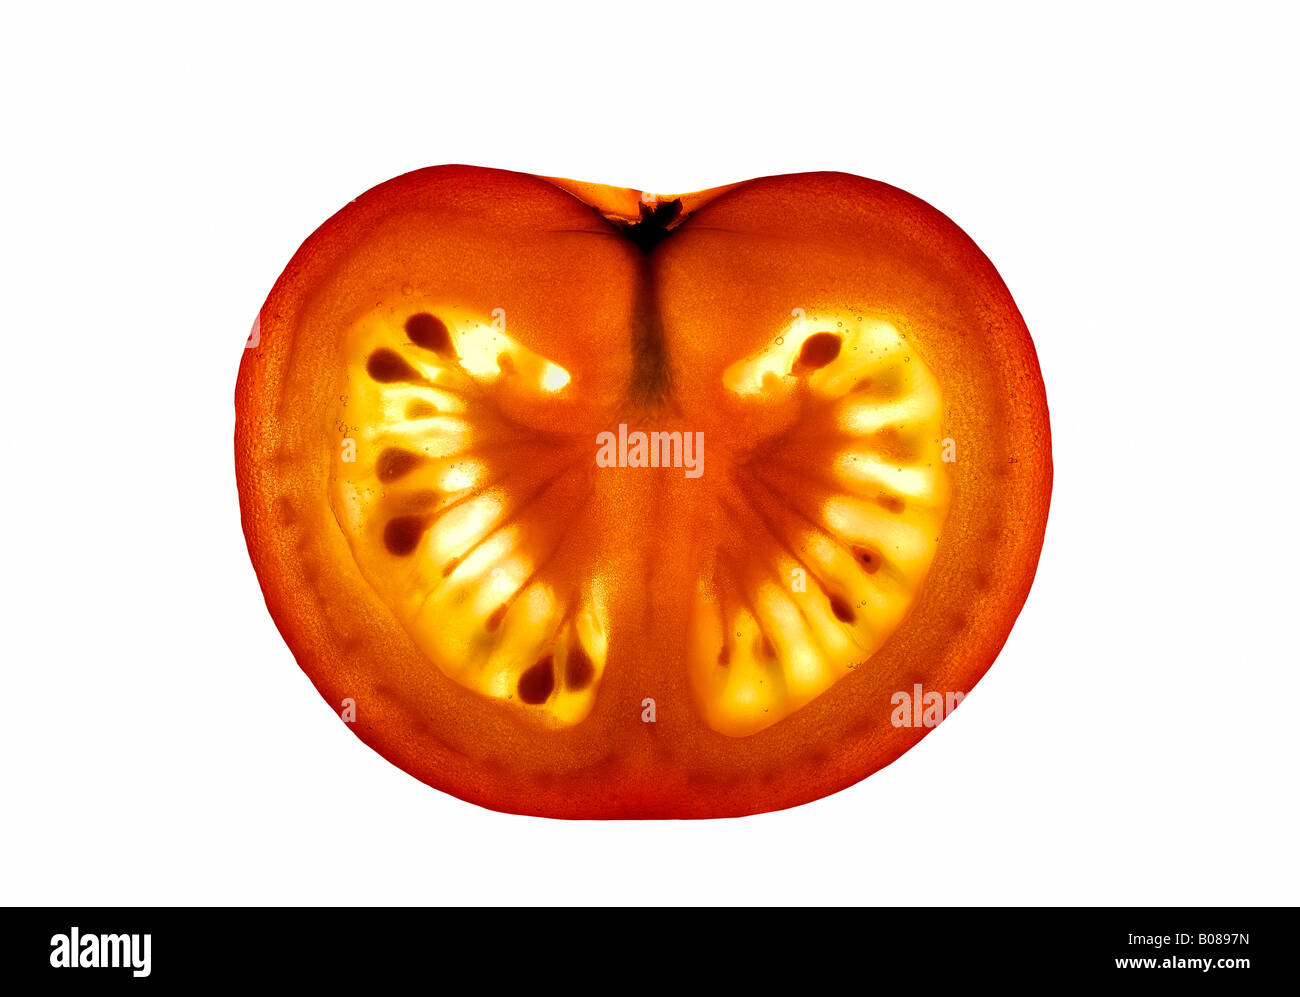 Slice of Tomato backlit to show internal structure Stock Photo